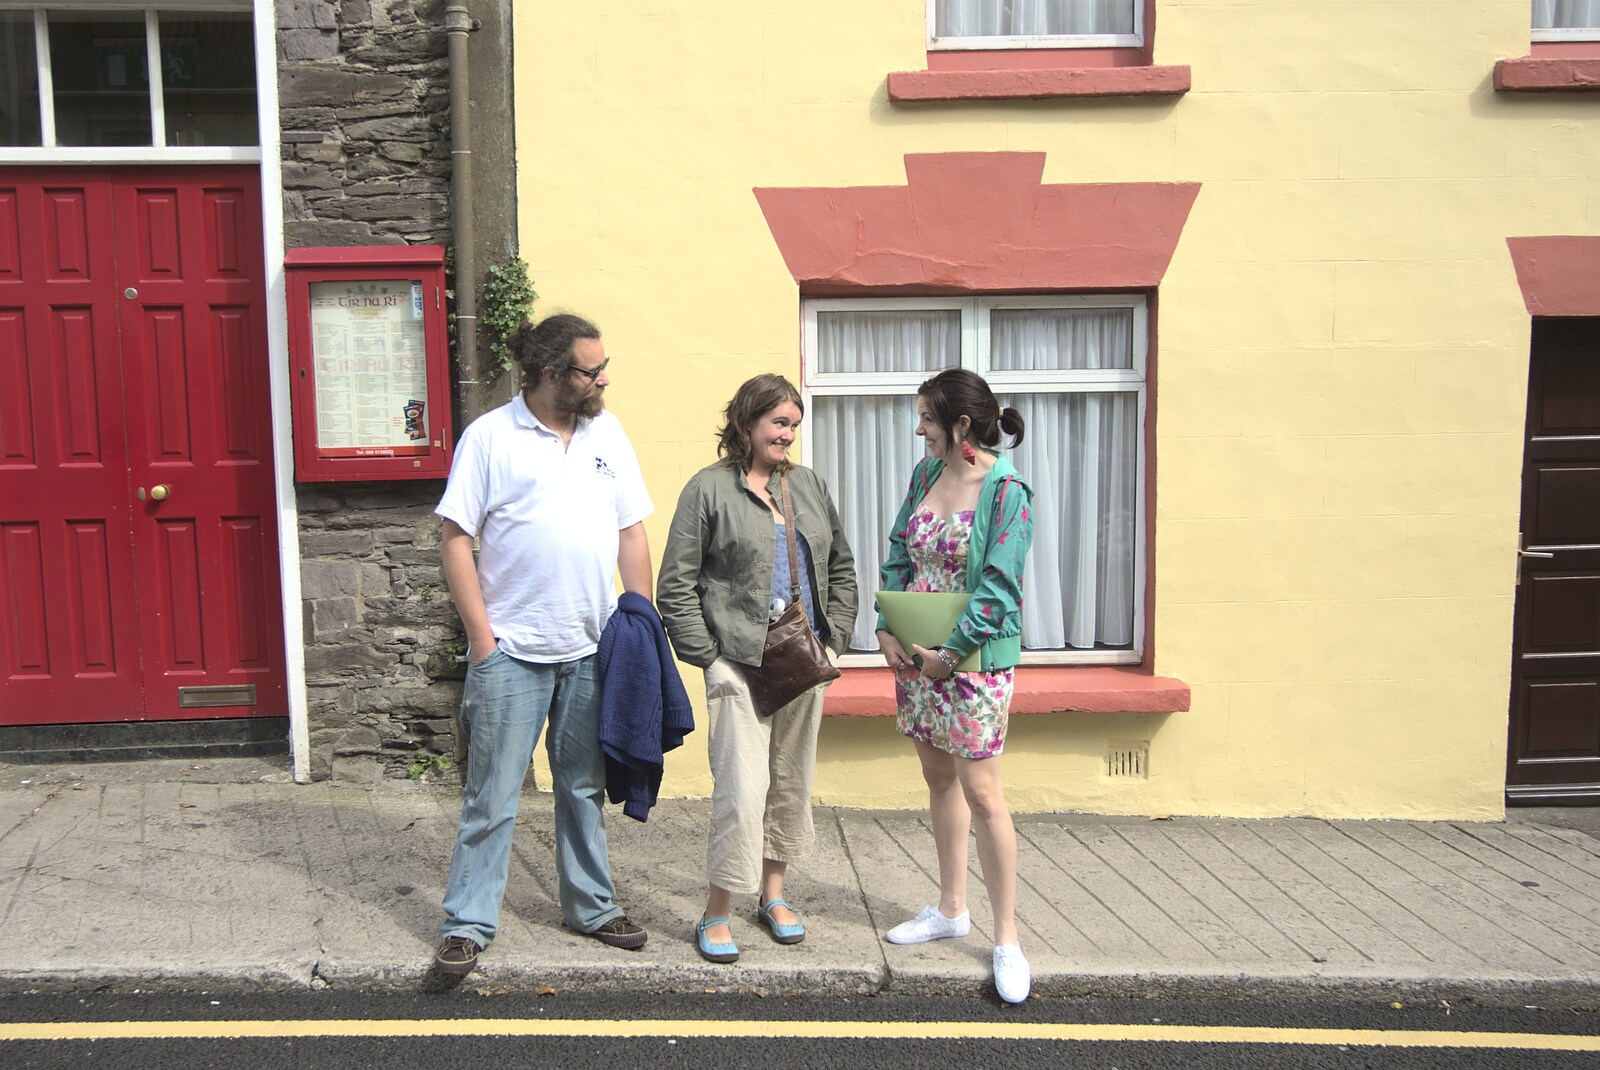 We see Julie again whilst walking around Dingle from A Trip to Dingle, County Kerry, Ireland - 21st July 2009